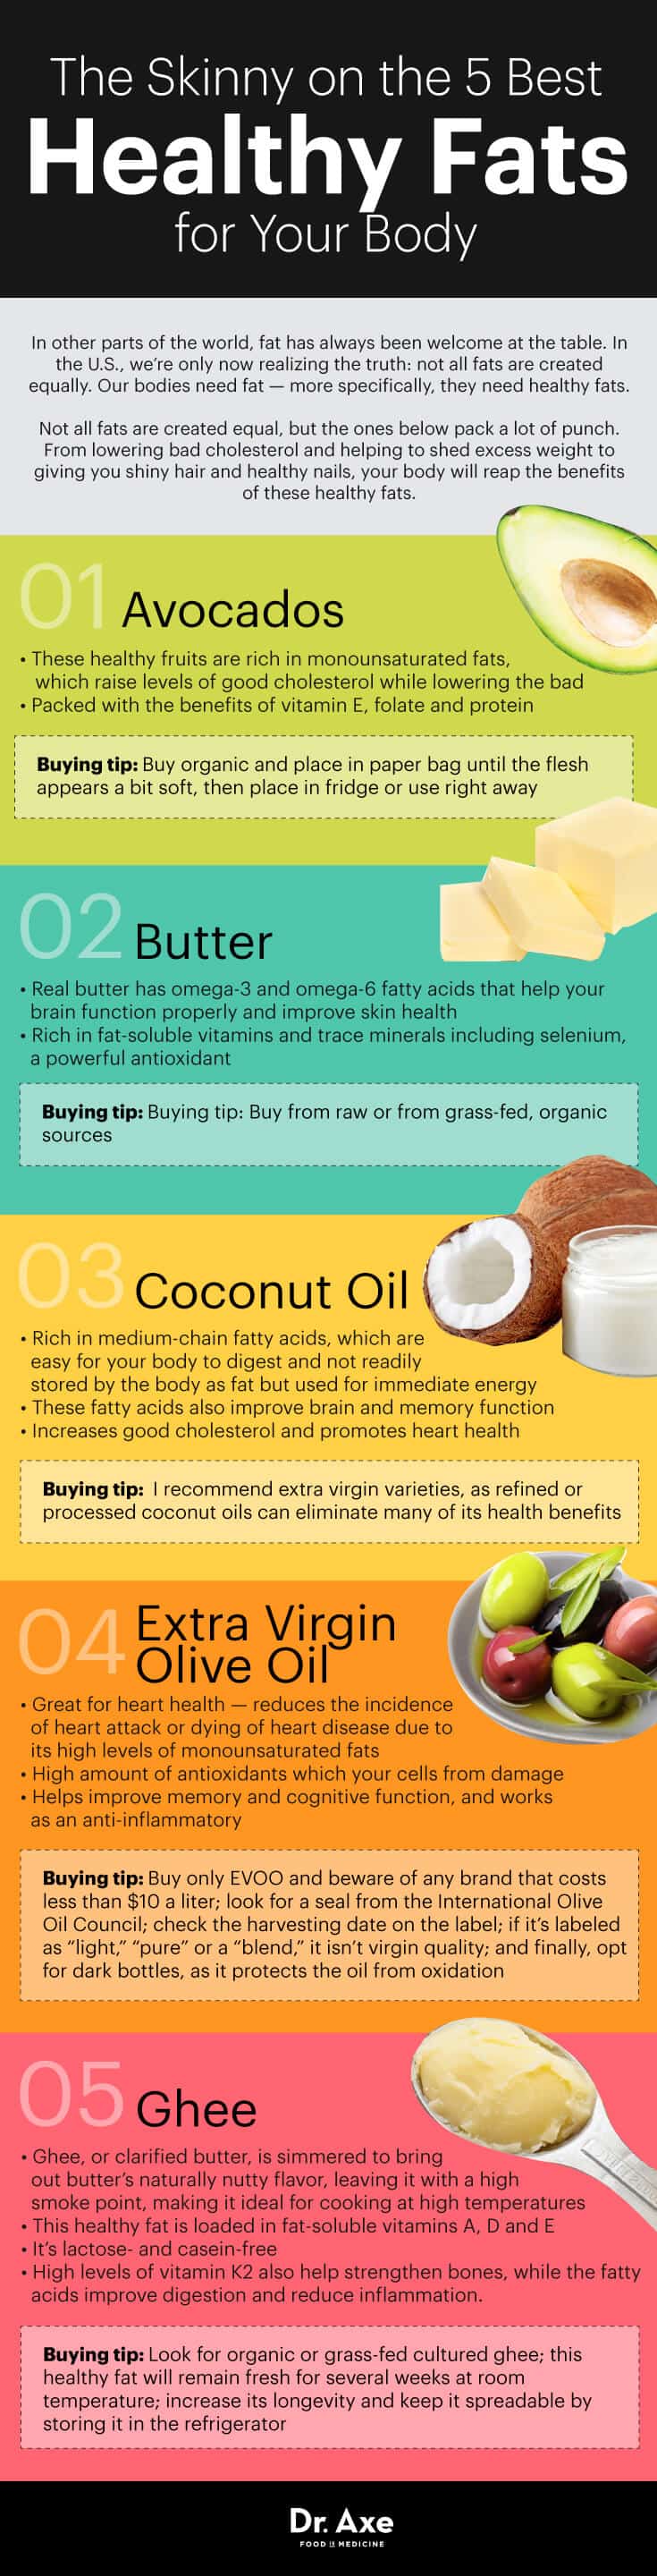 The 5 Best Healthy Fats for Your Body - Dr. Axe